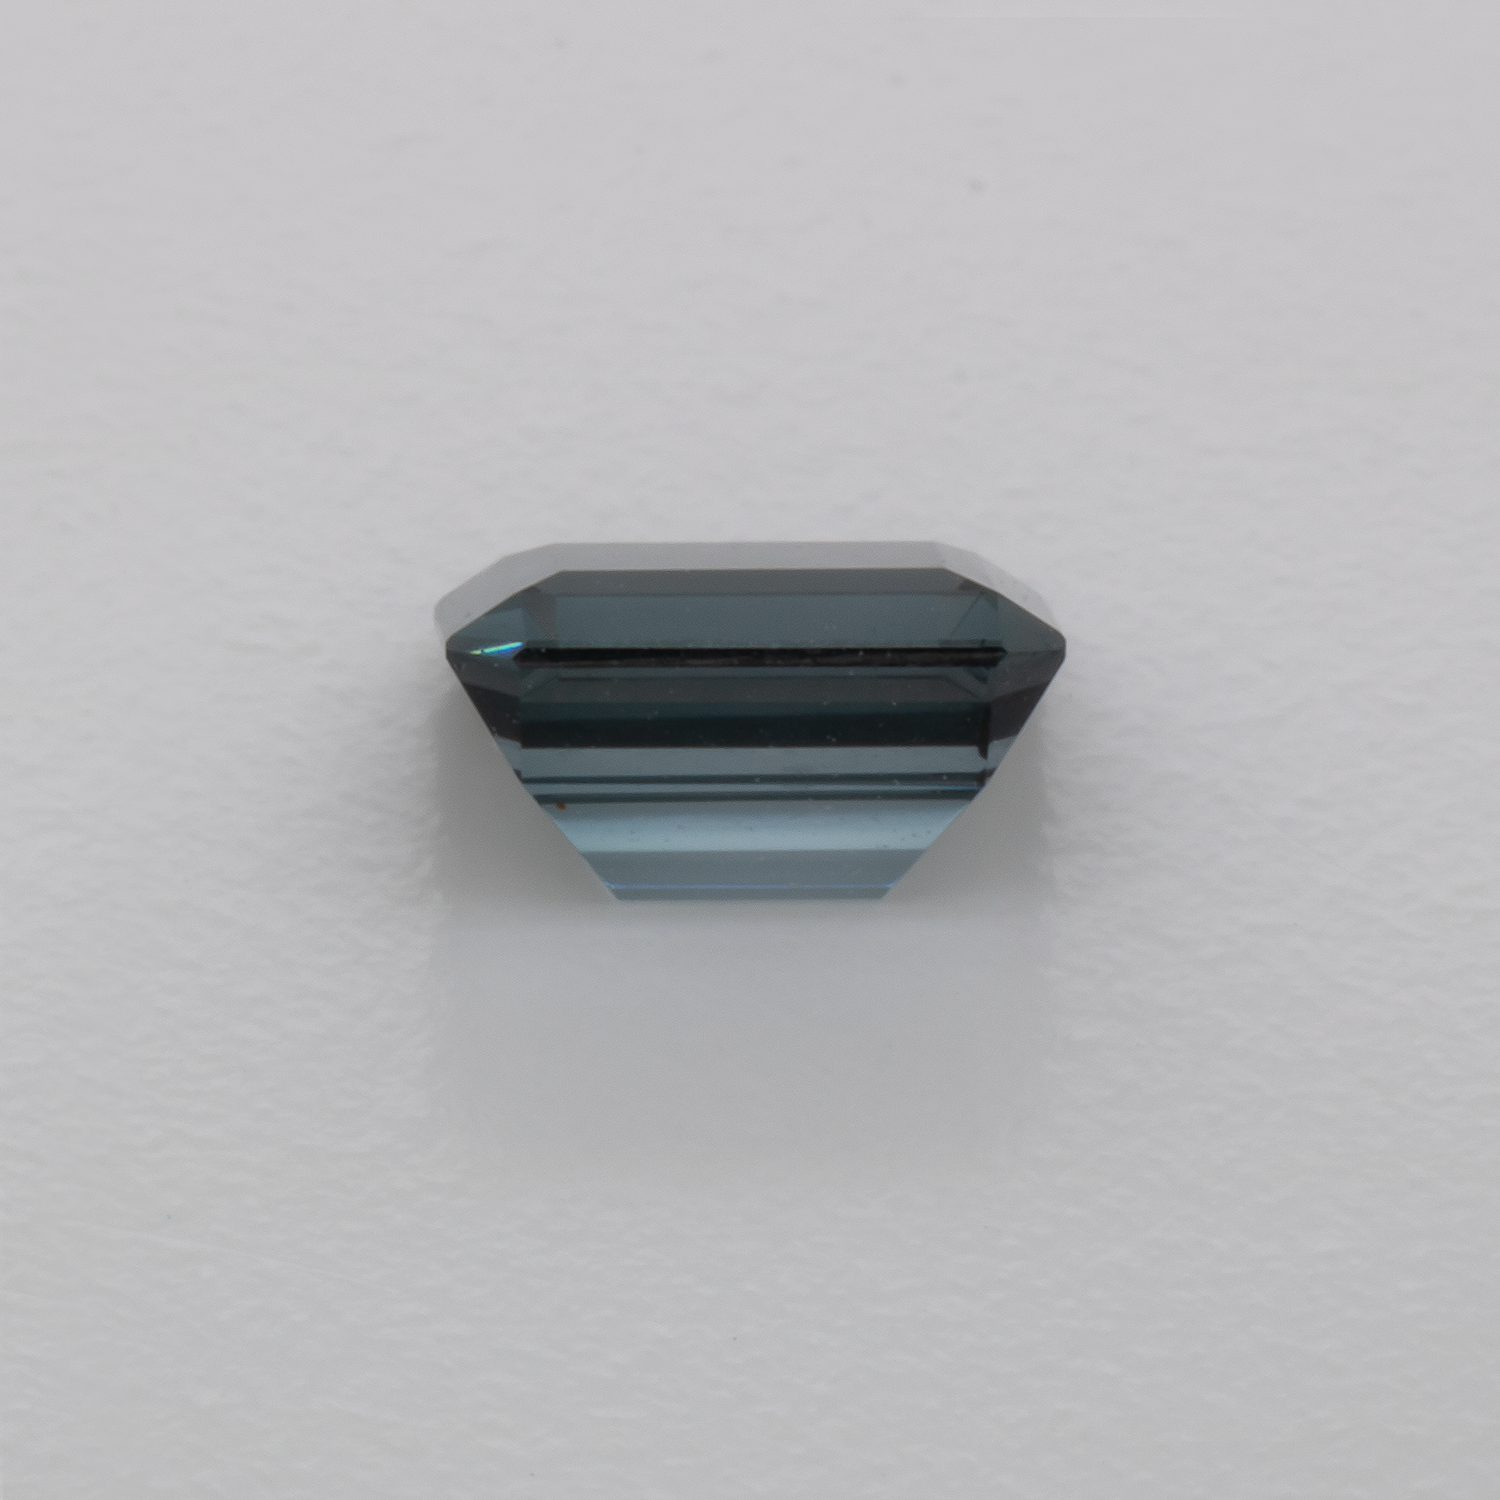 Spinel - grey, octagon, 5.6x4.5 mm, 0.75 cts, No. SP90054